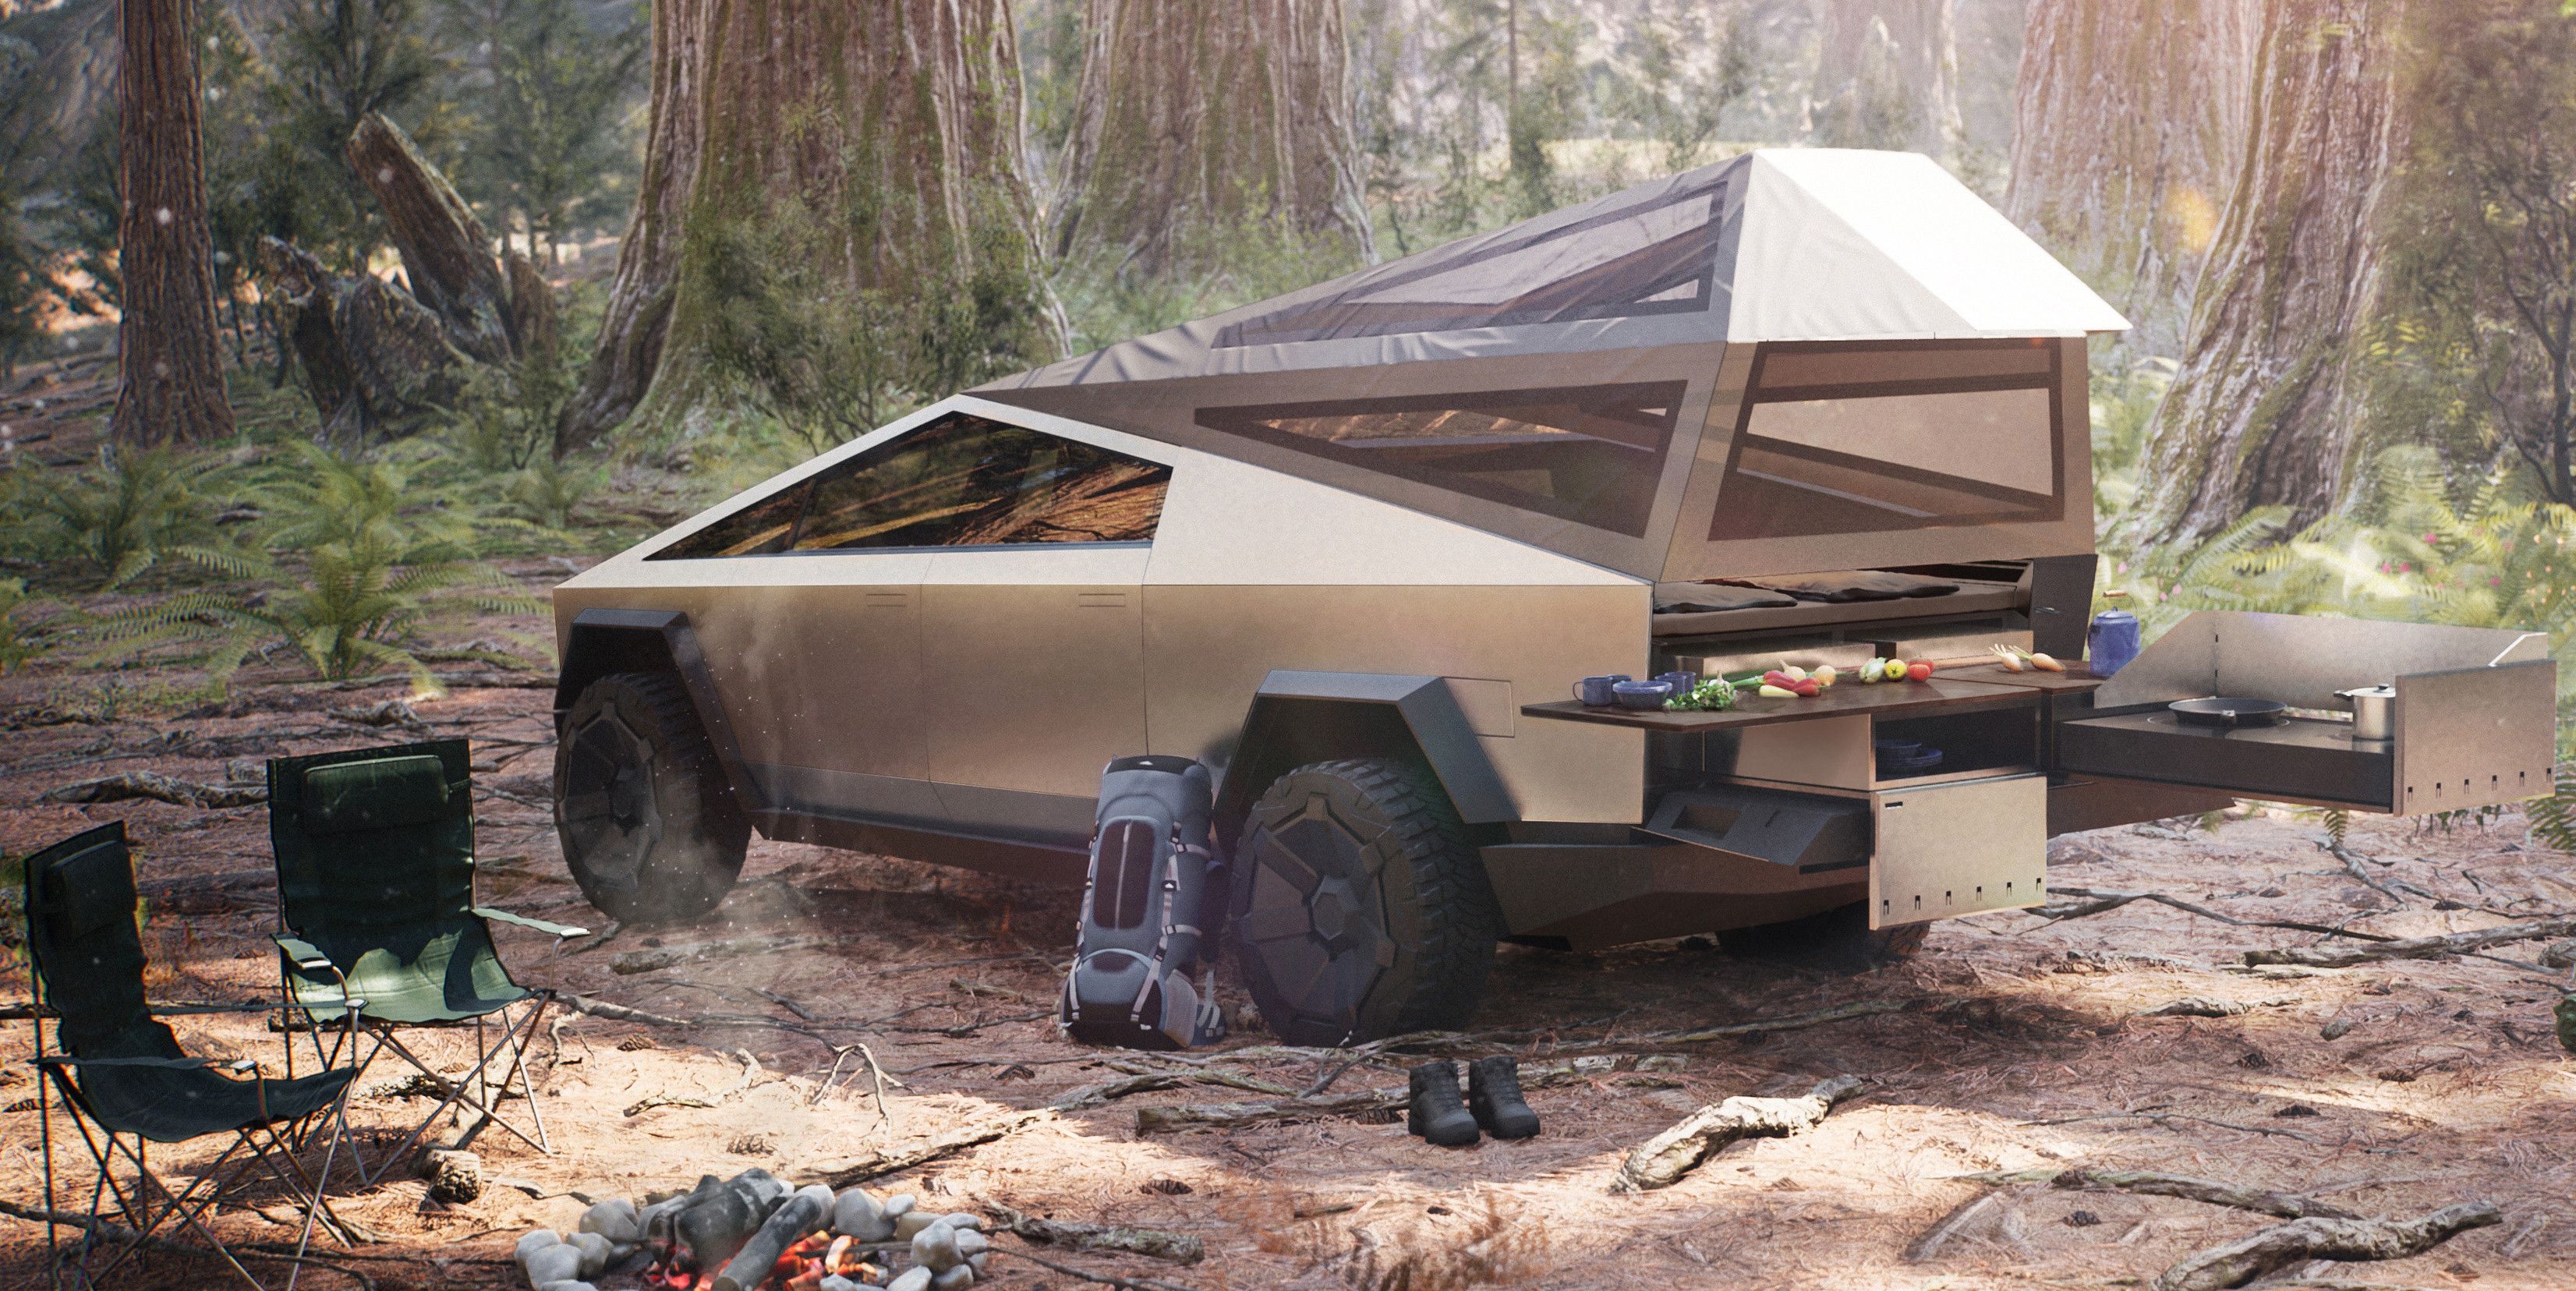 Tesla Cybertruck is equipped with camping equipment in the middle of the forest